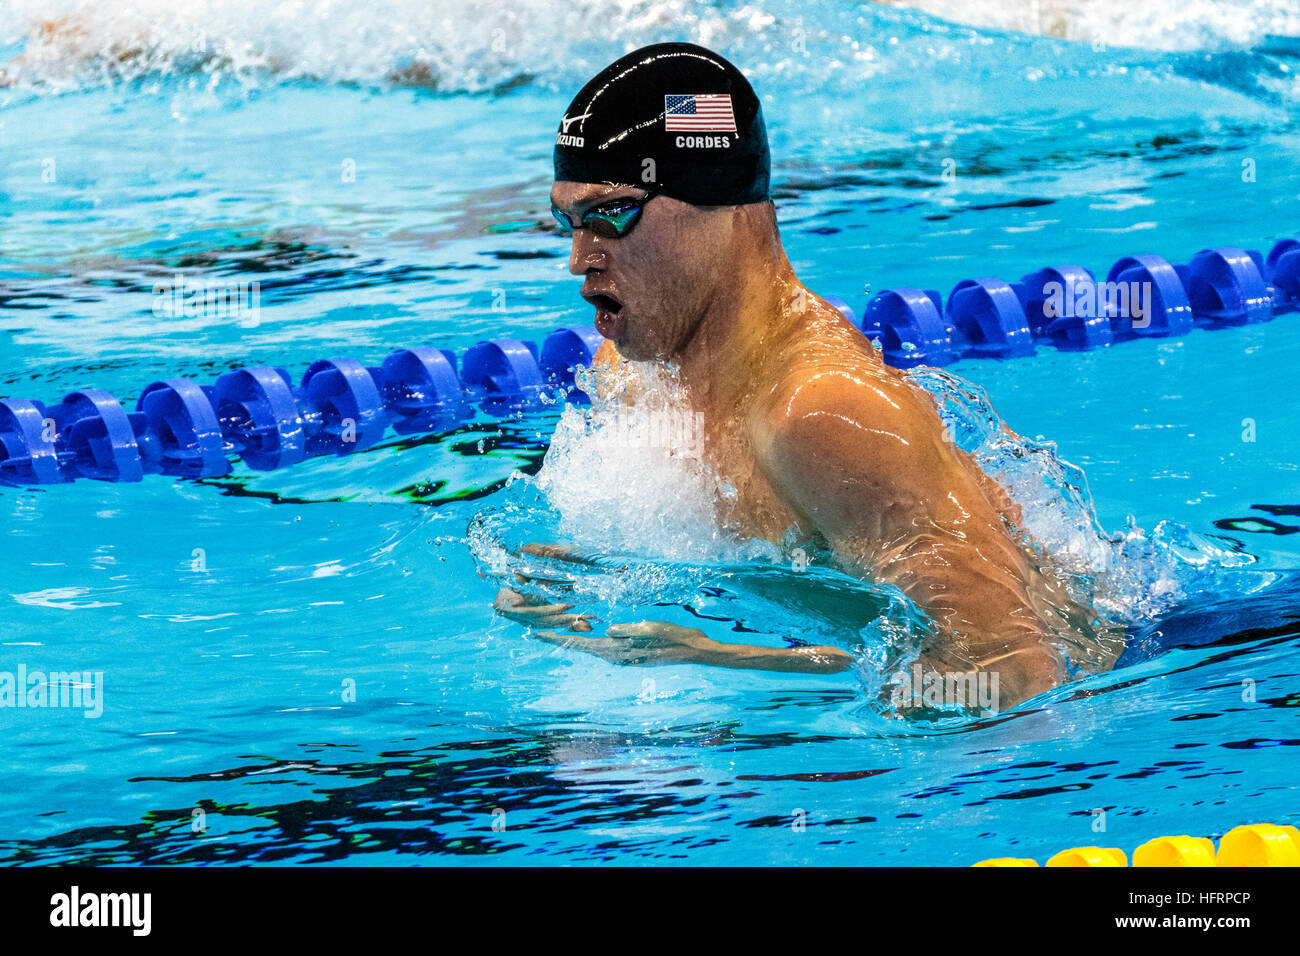 Rio de Janeiro, Brazil. 9 August 2016.   Kevin Cordes (USA) competing in the semifinal of the men's 200m breaststroke at the 2016 Olympic Summer Games Stock Photo